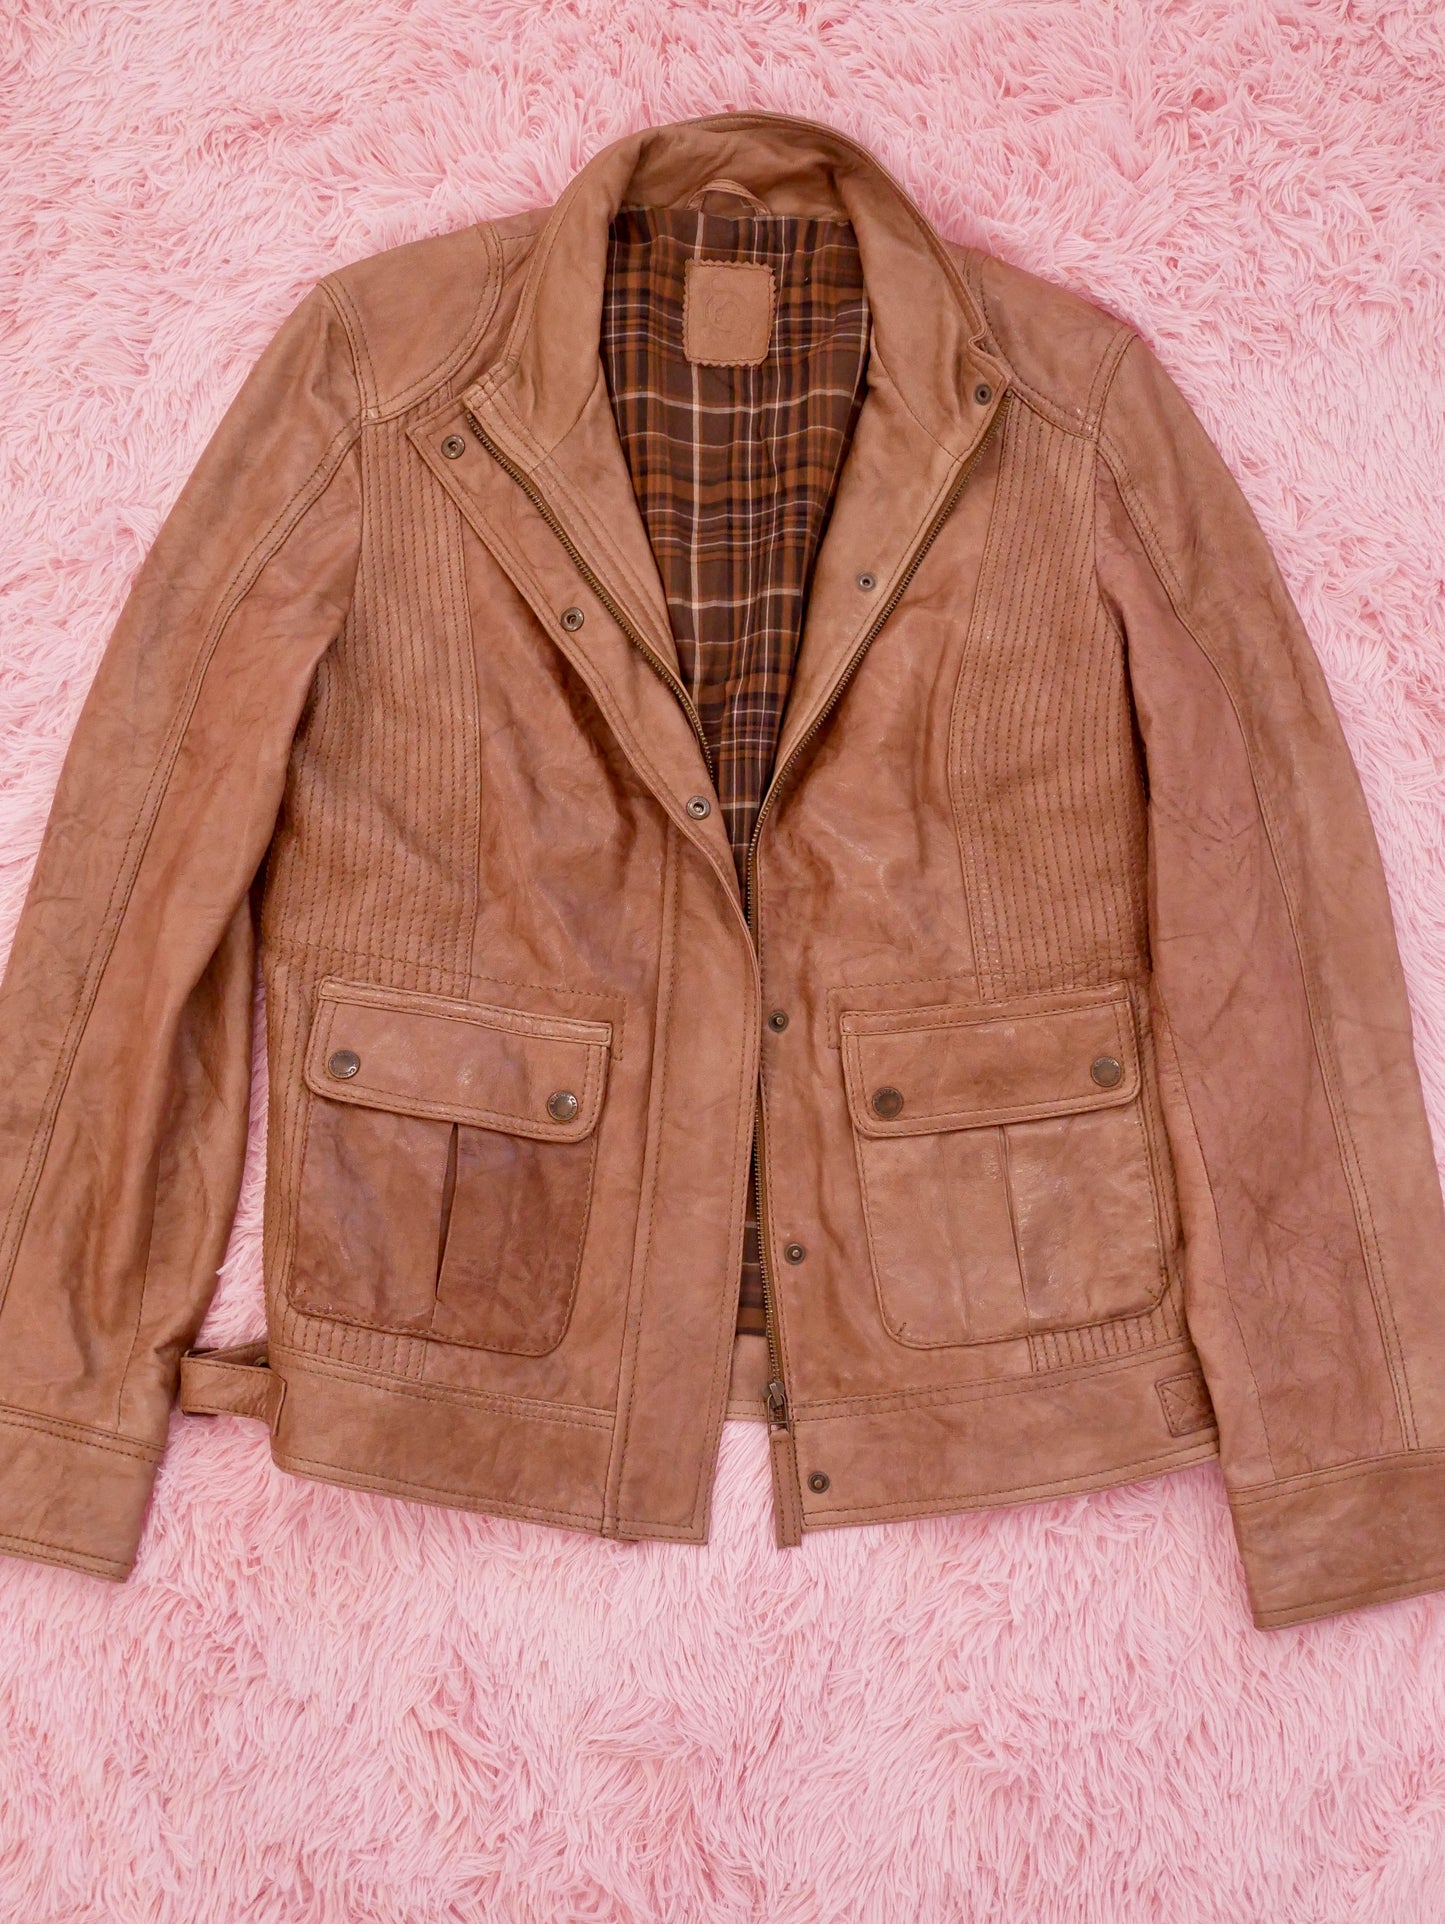 Brown Oversized Leather Jacket